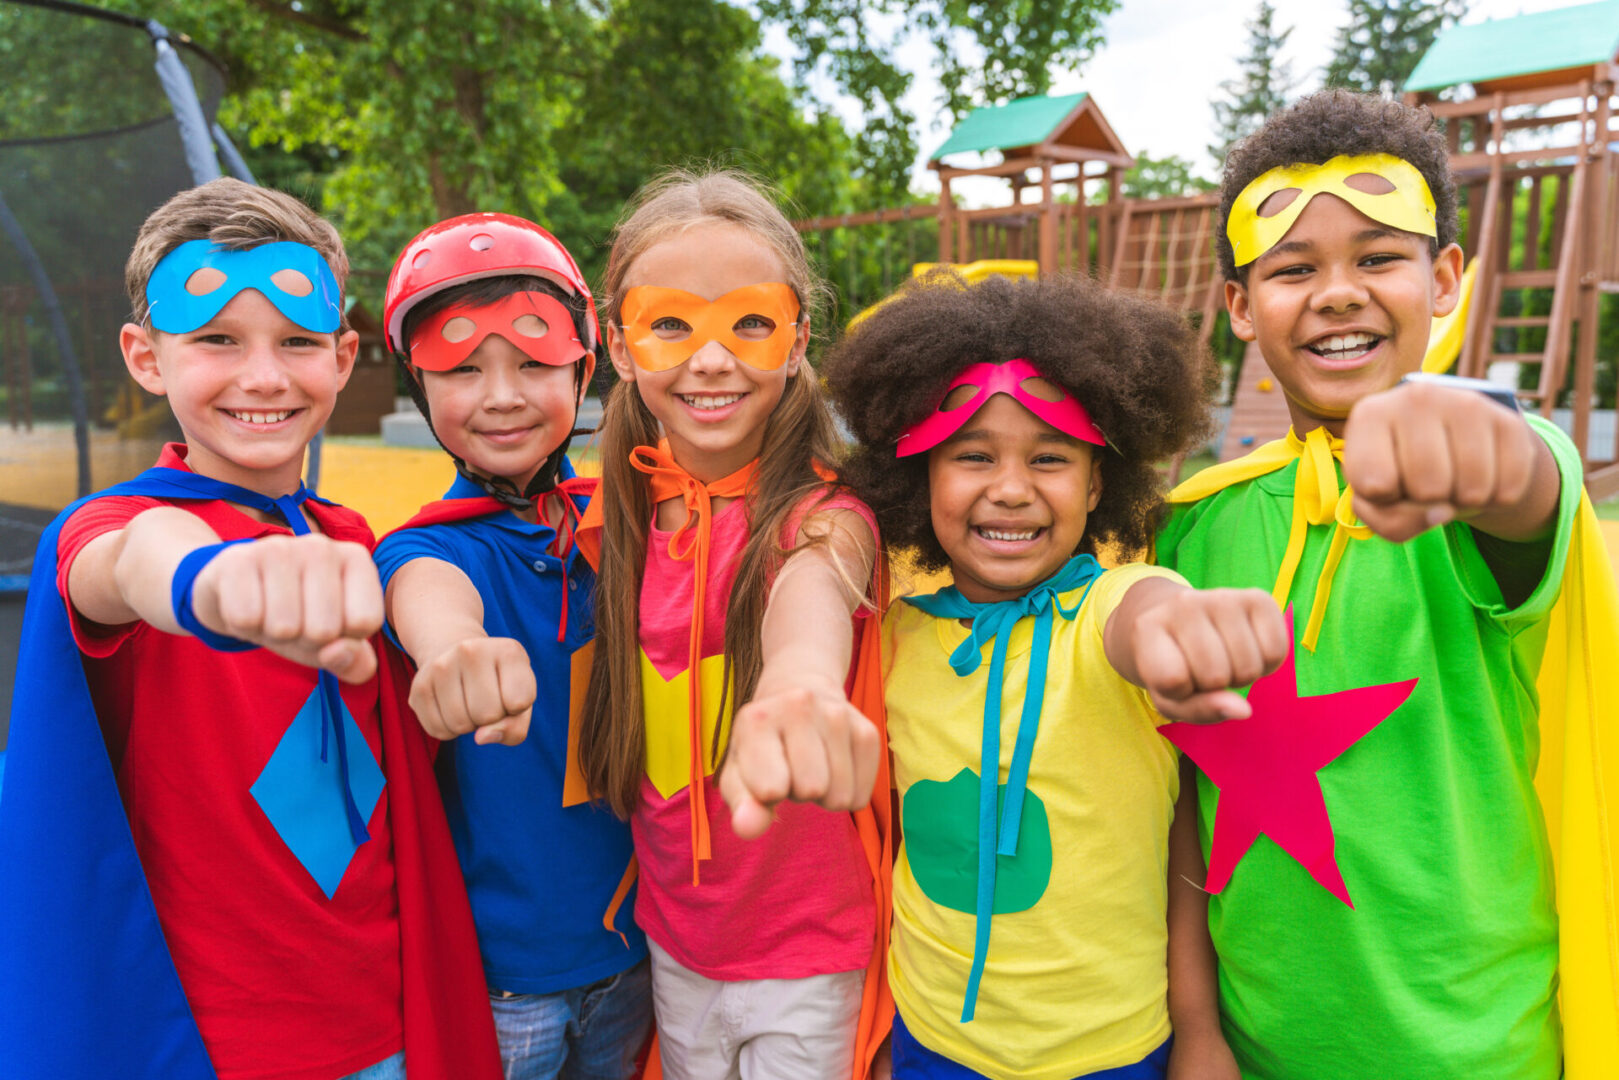 Multiracial group of young schooler wearing superhero costumes and having fun outdoors